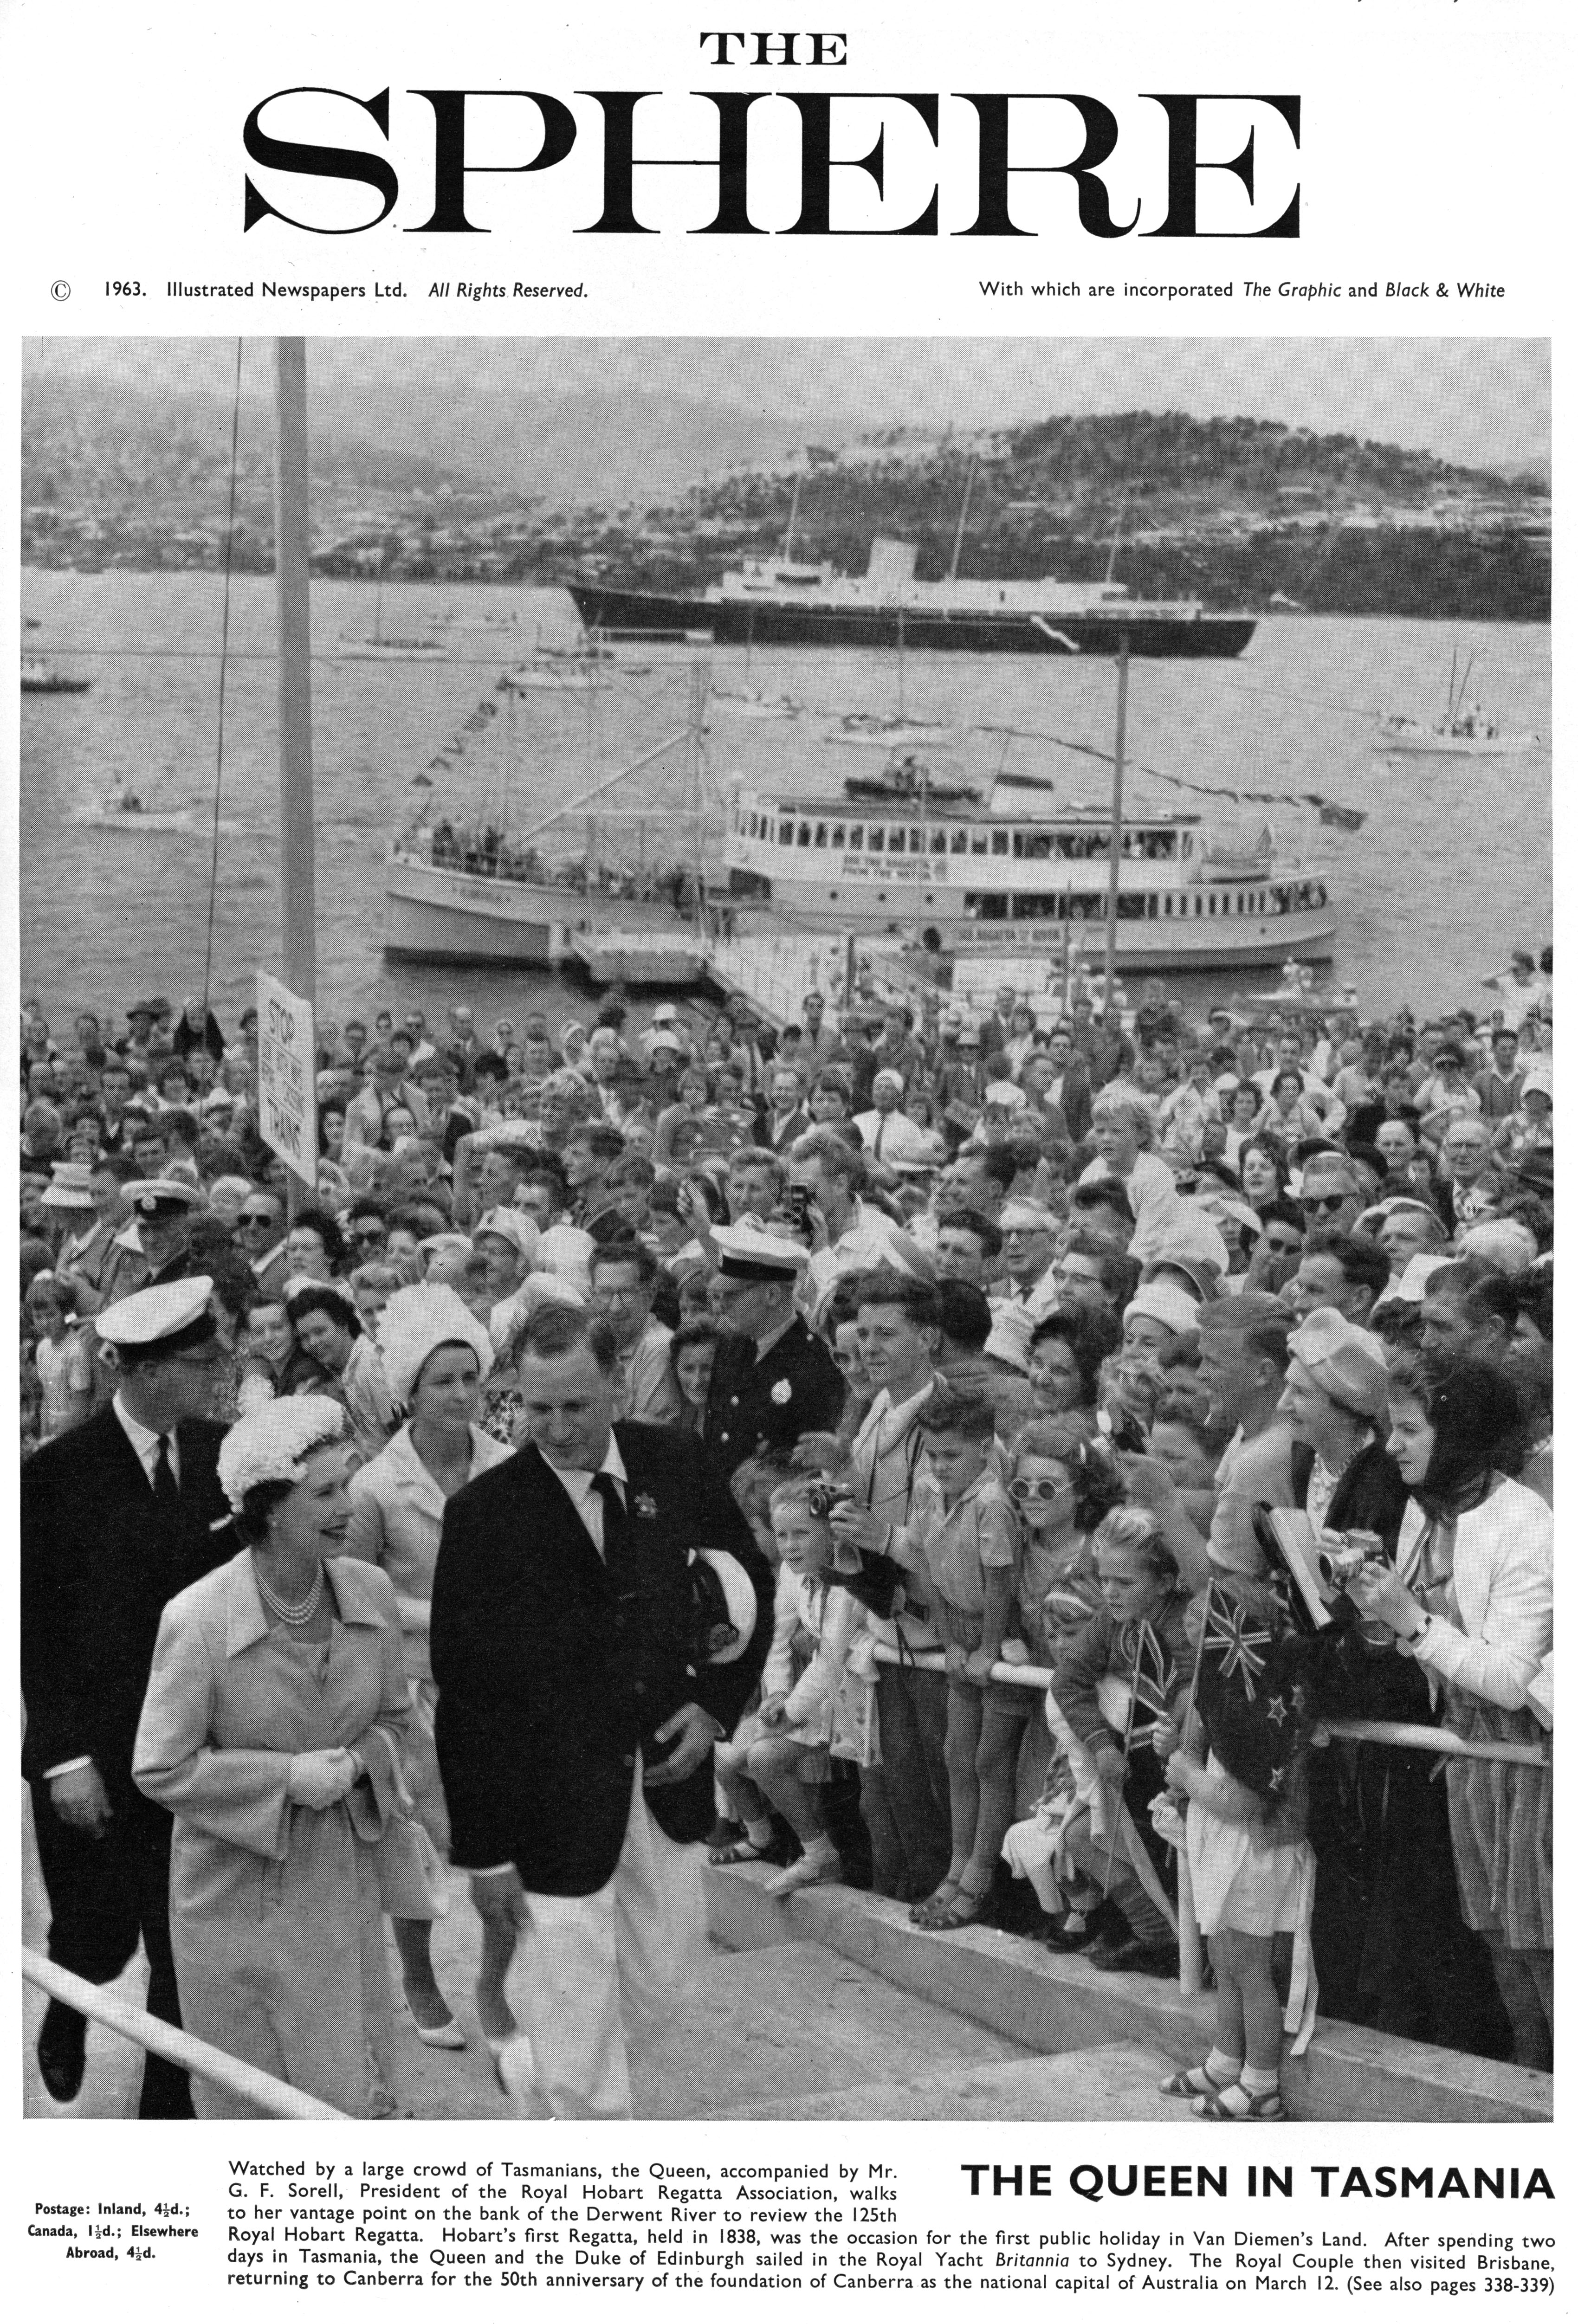 First Anniversary The Queen’s Death -The Queen on a visit to Tasmania in 1963